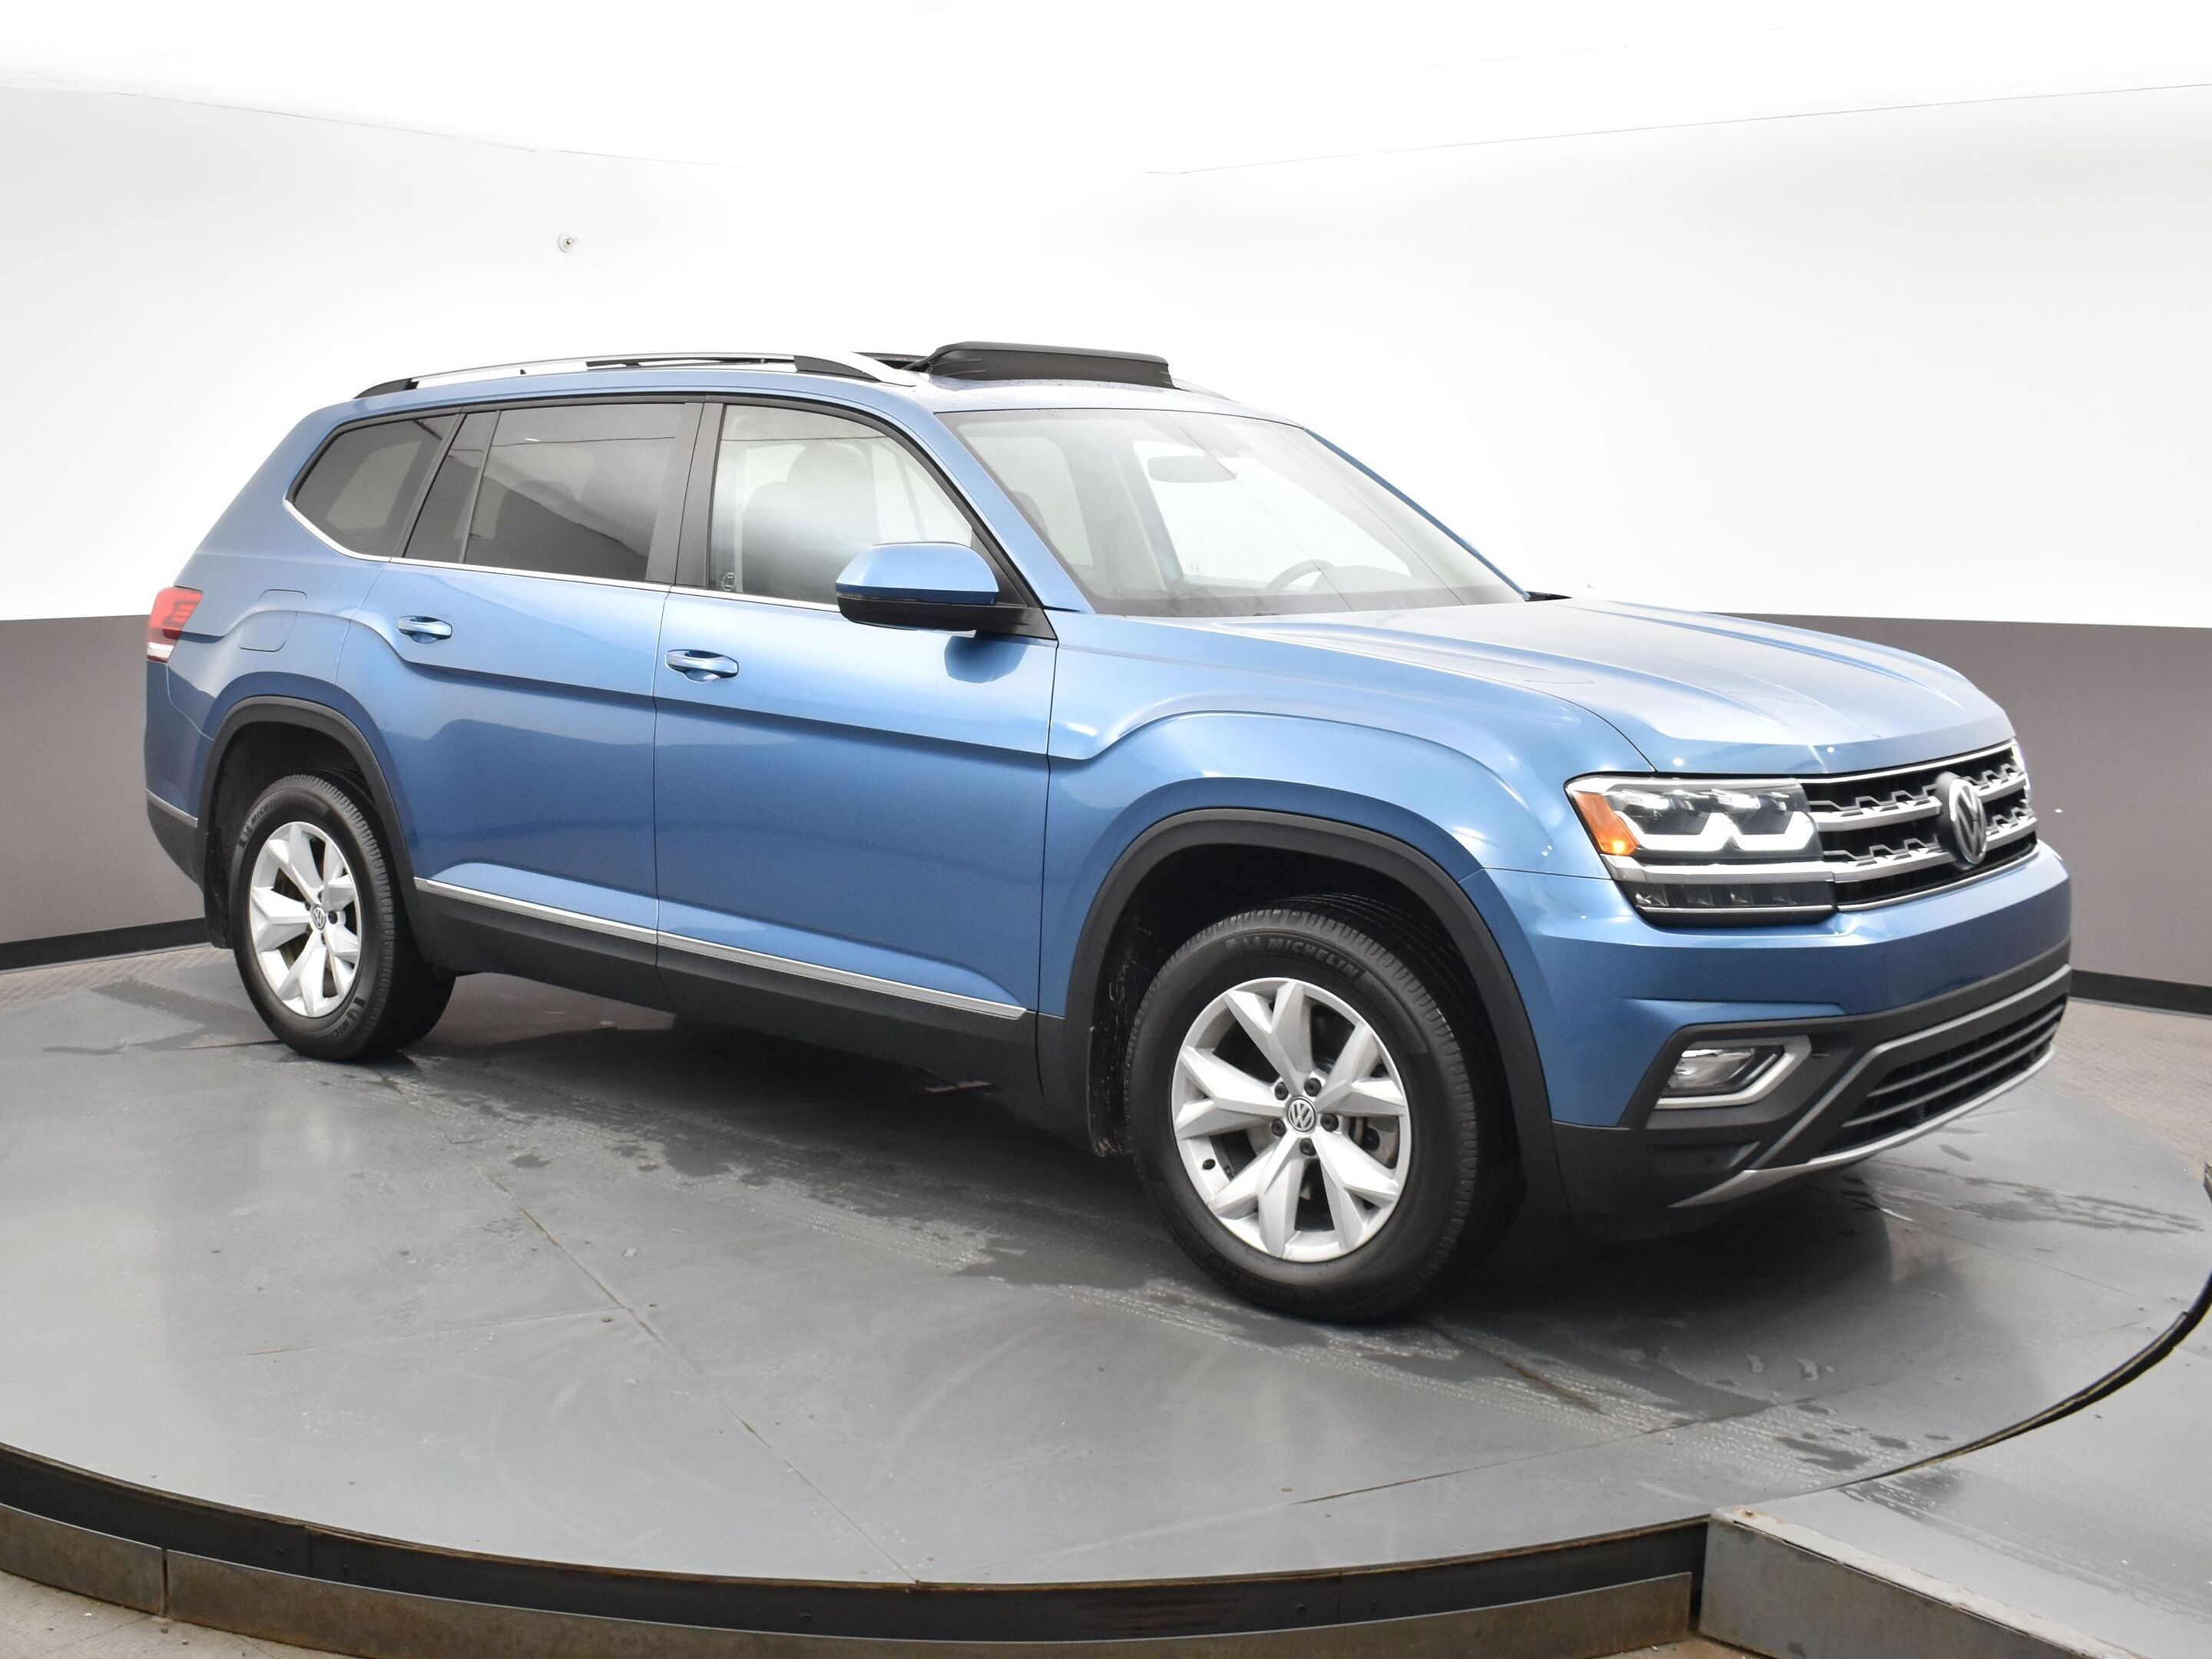 2019 Volkswagen Atlas Highline with Leather Interior - Panoramic Roof - 